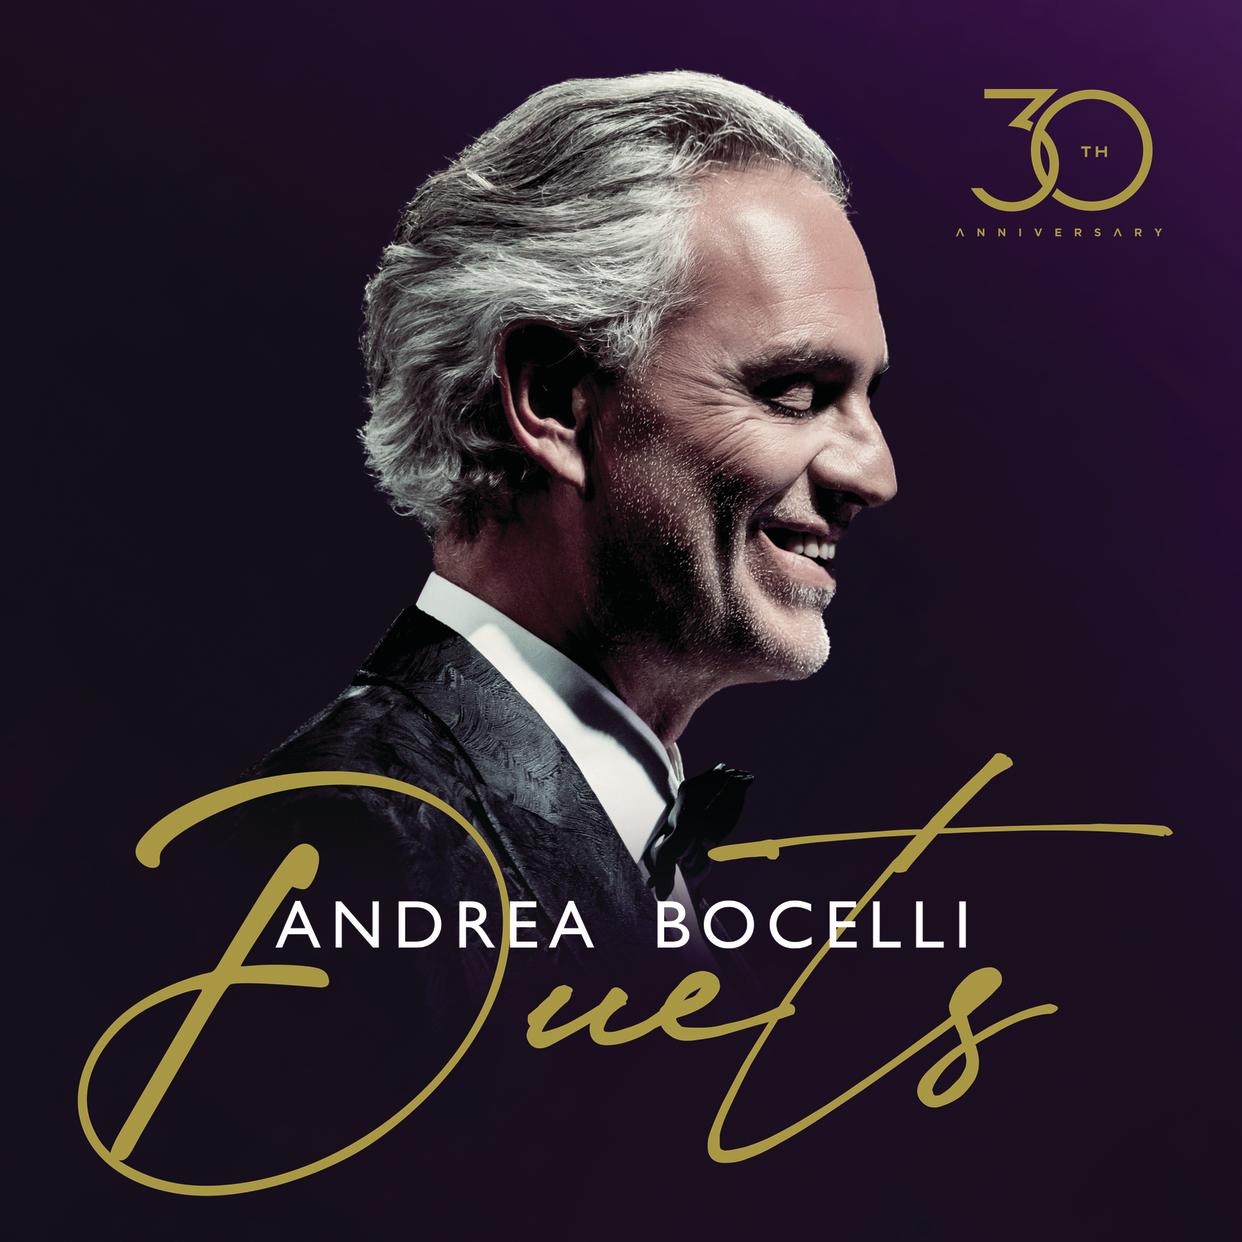 Album cover of Andrea Bocelli's Duets with Bocelli smiling in a suit